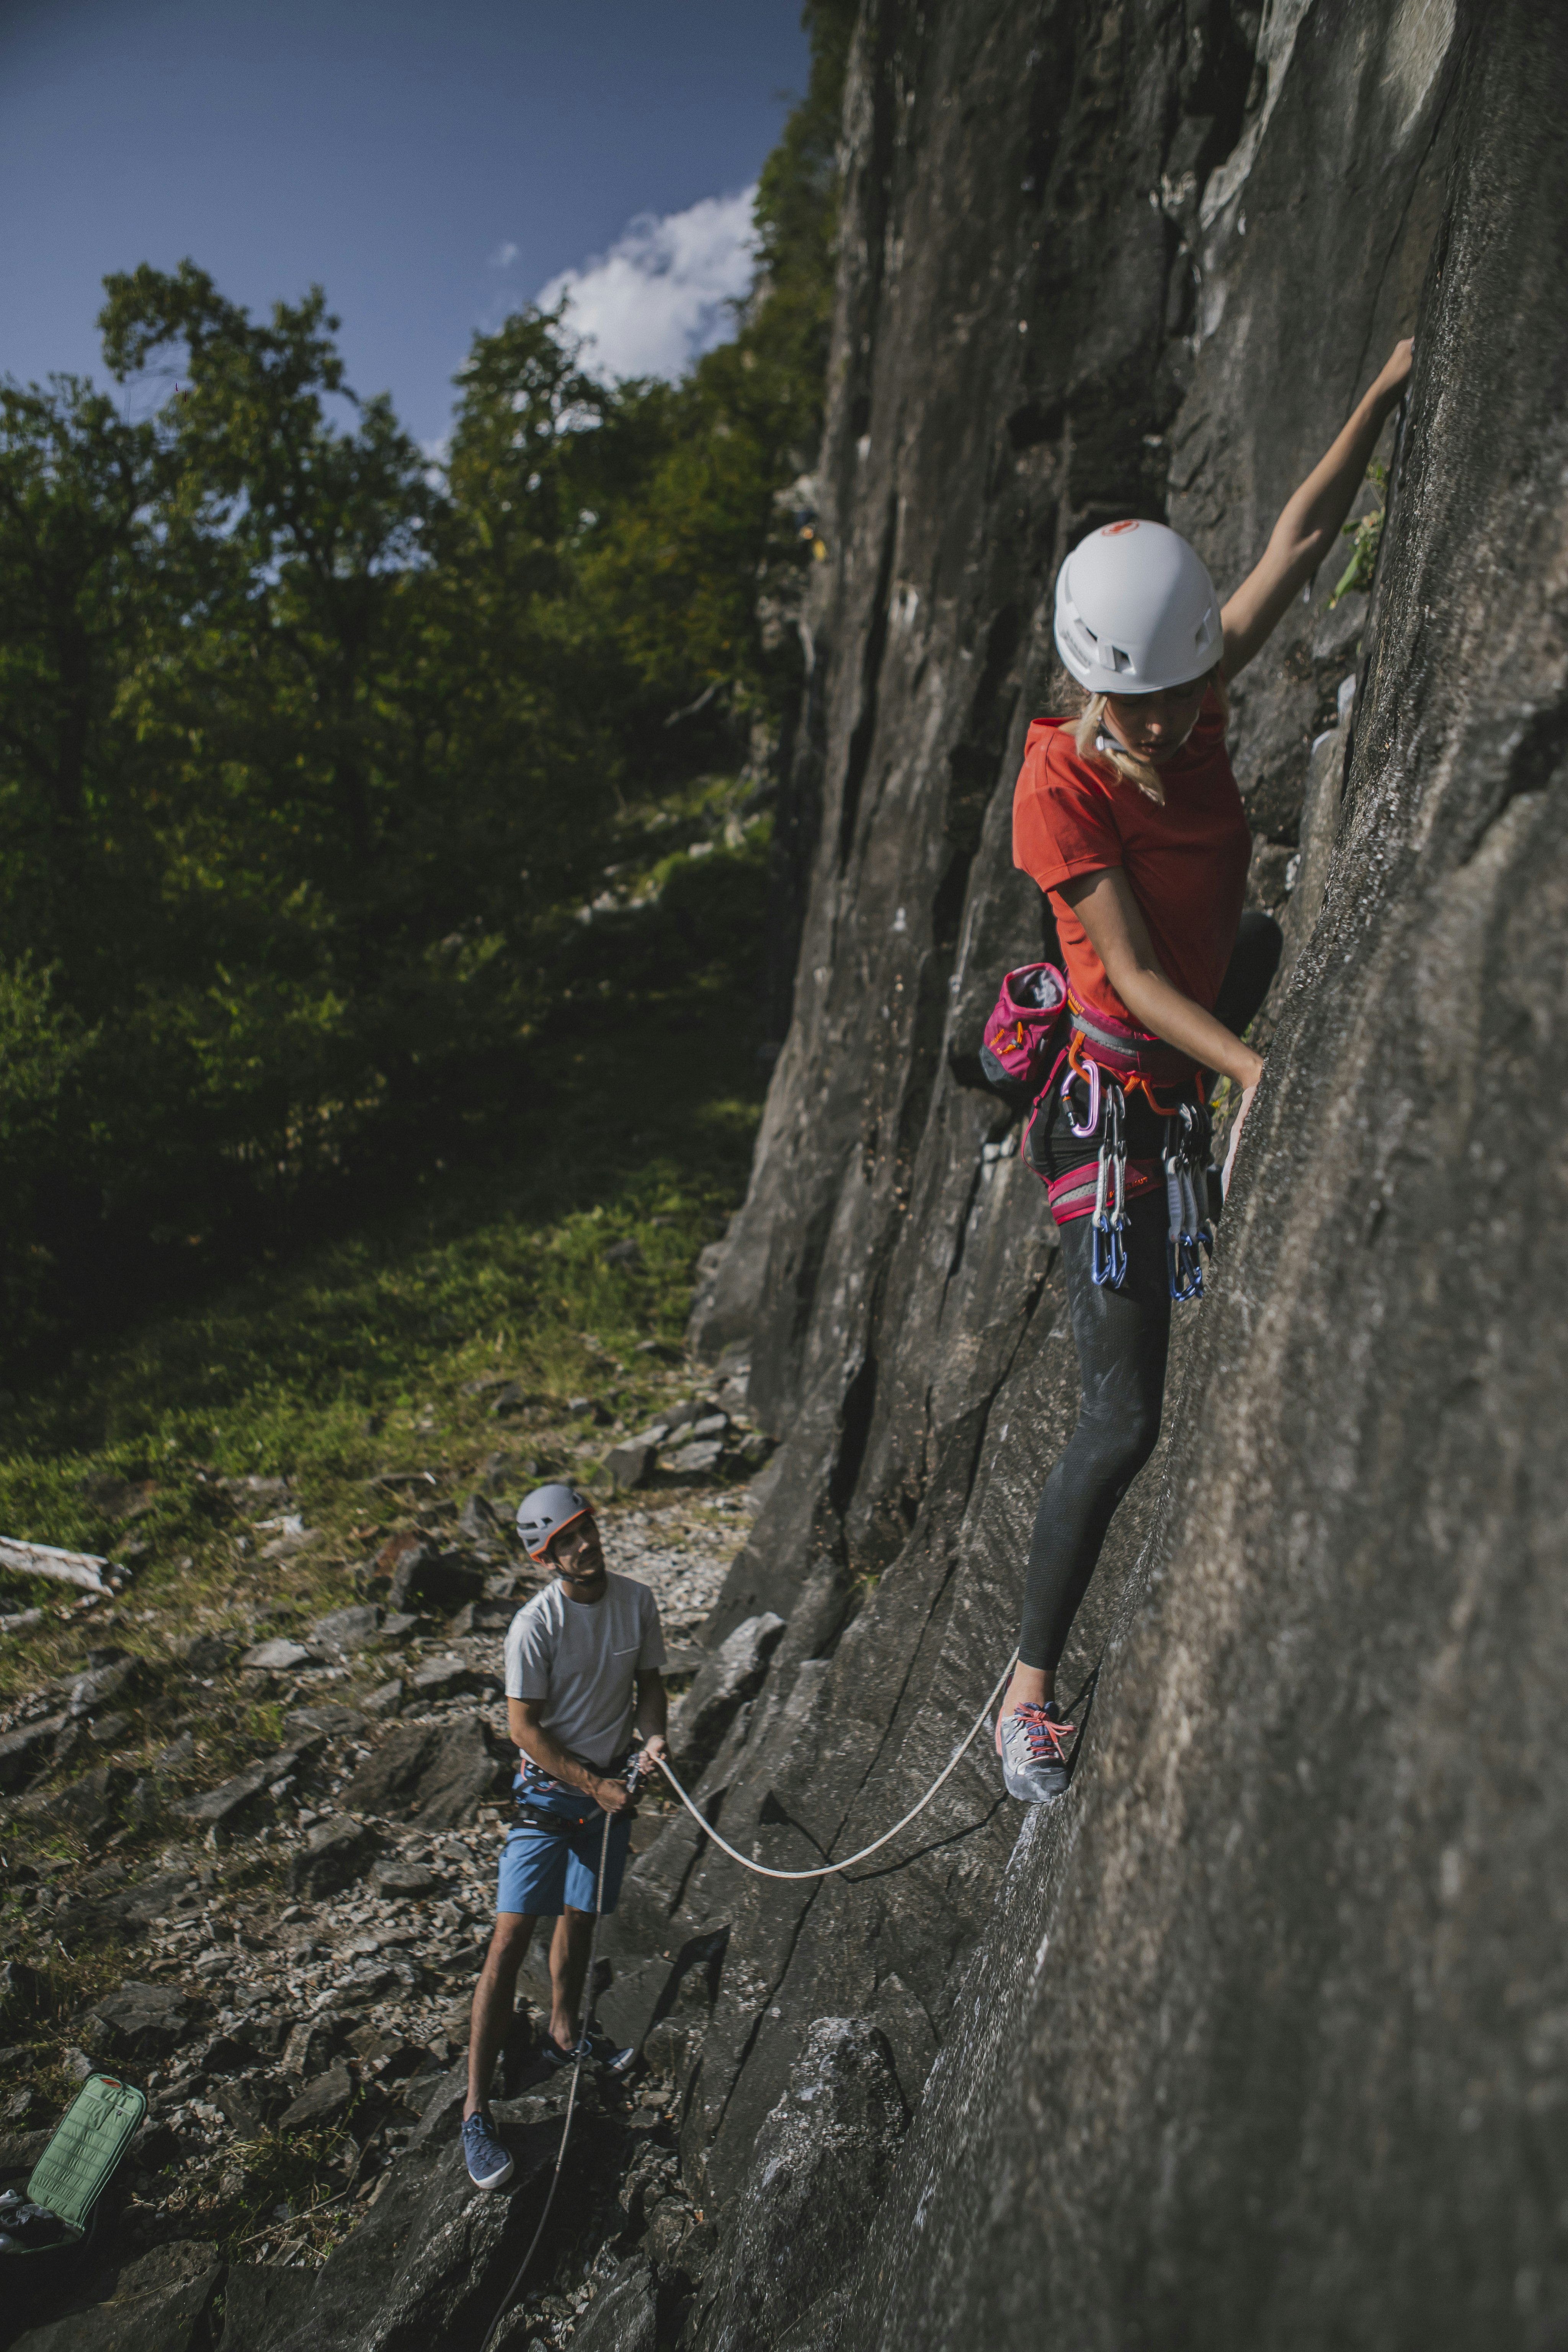 Two climbers on a rock wall